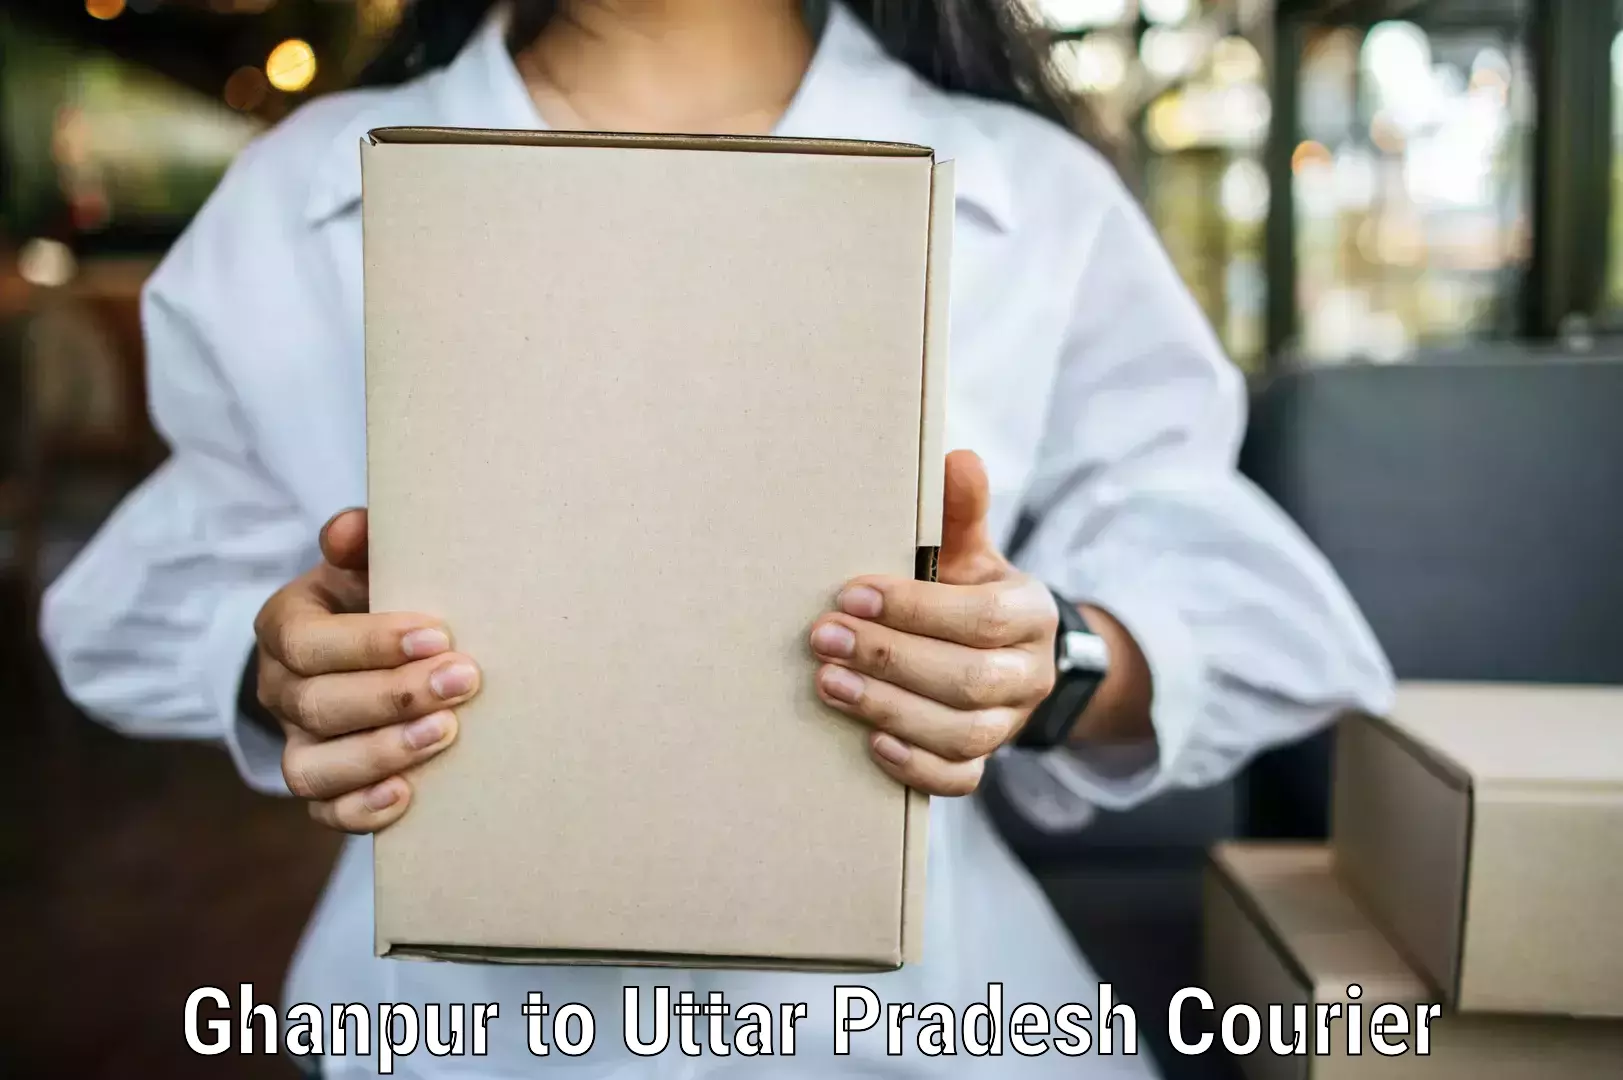 Discounted shipping Ghanpur to Aligarh Muslim University